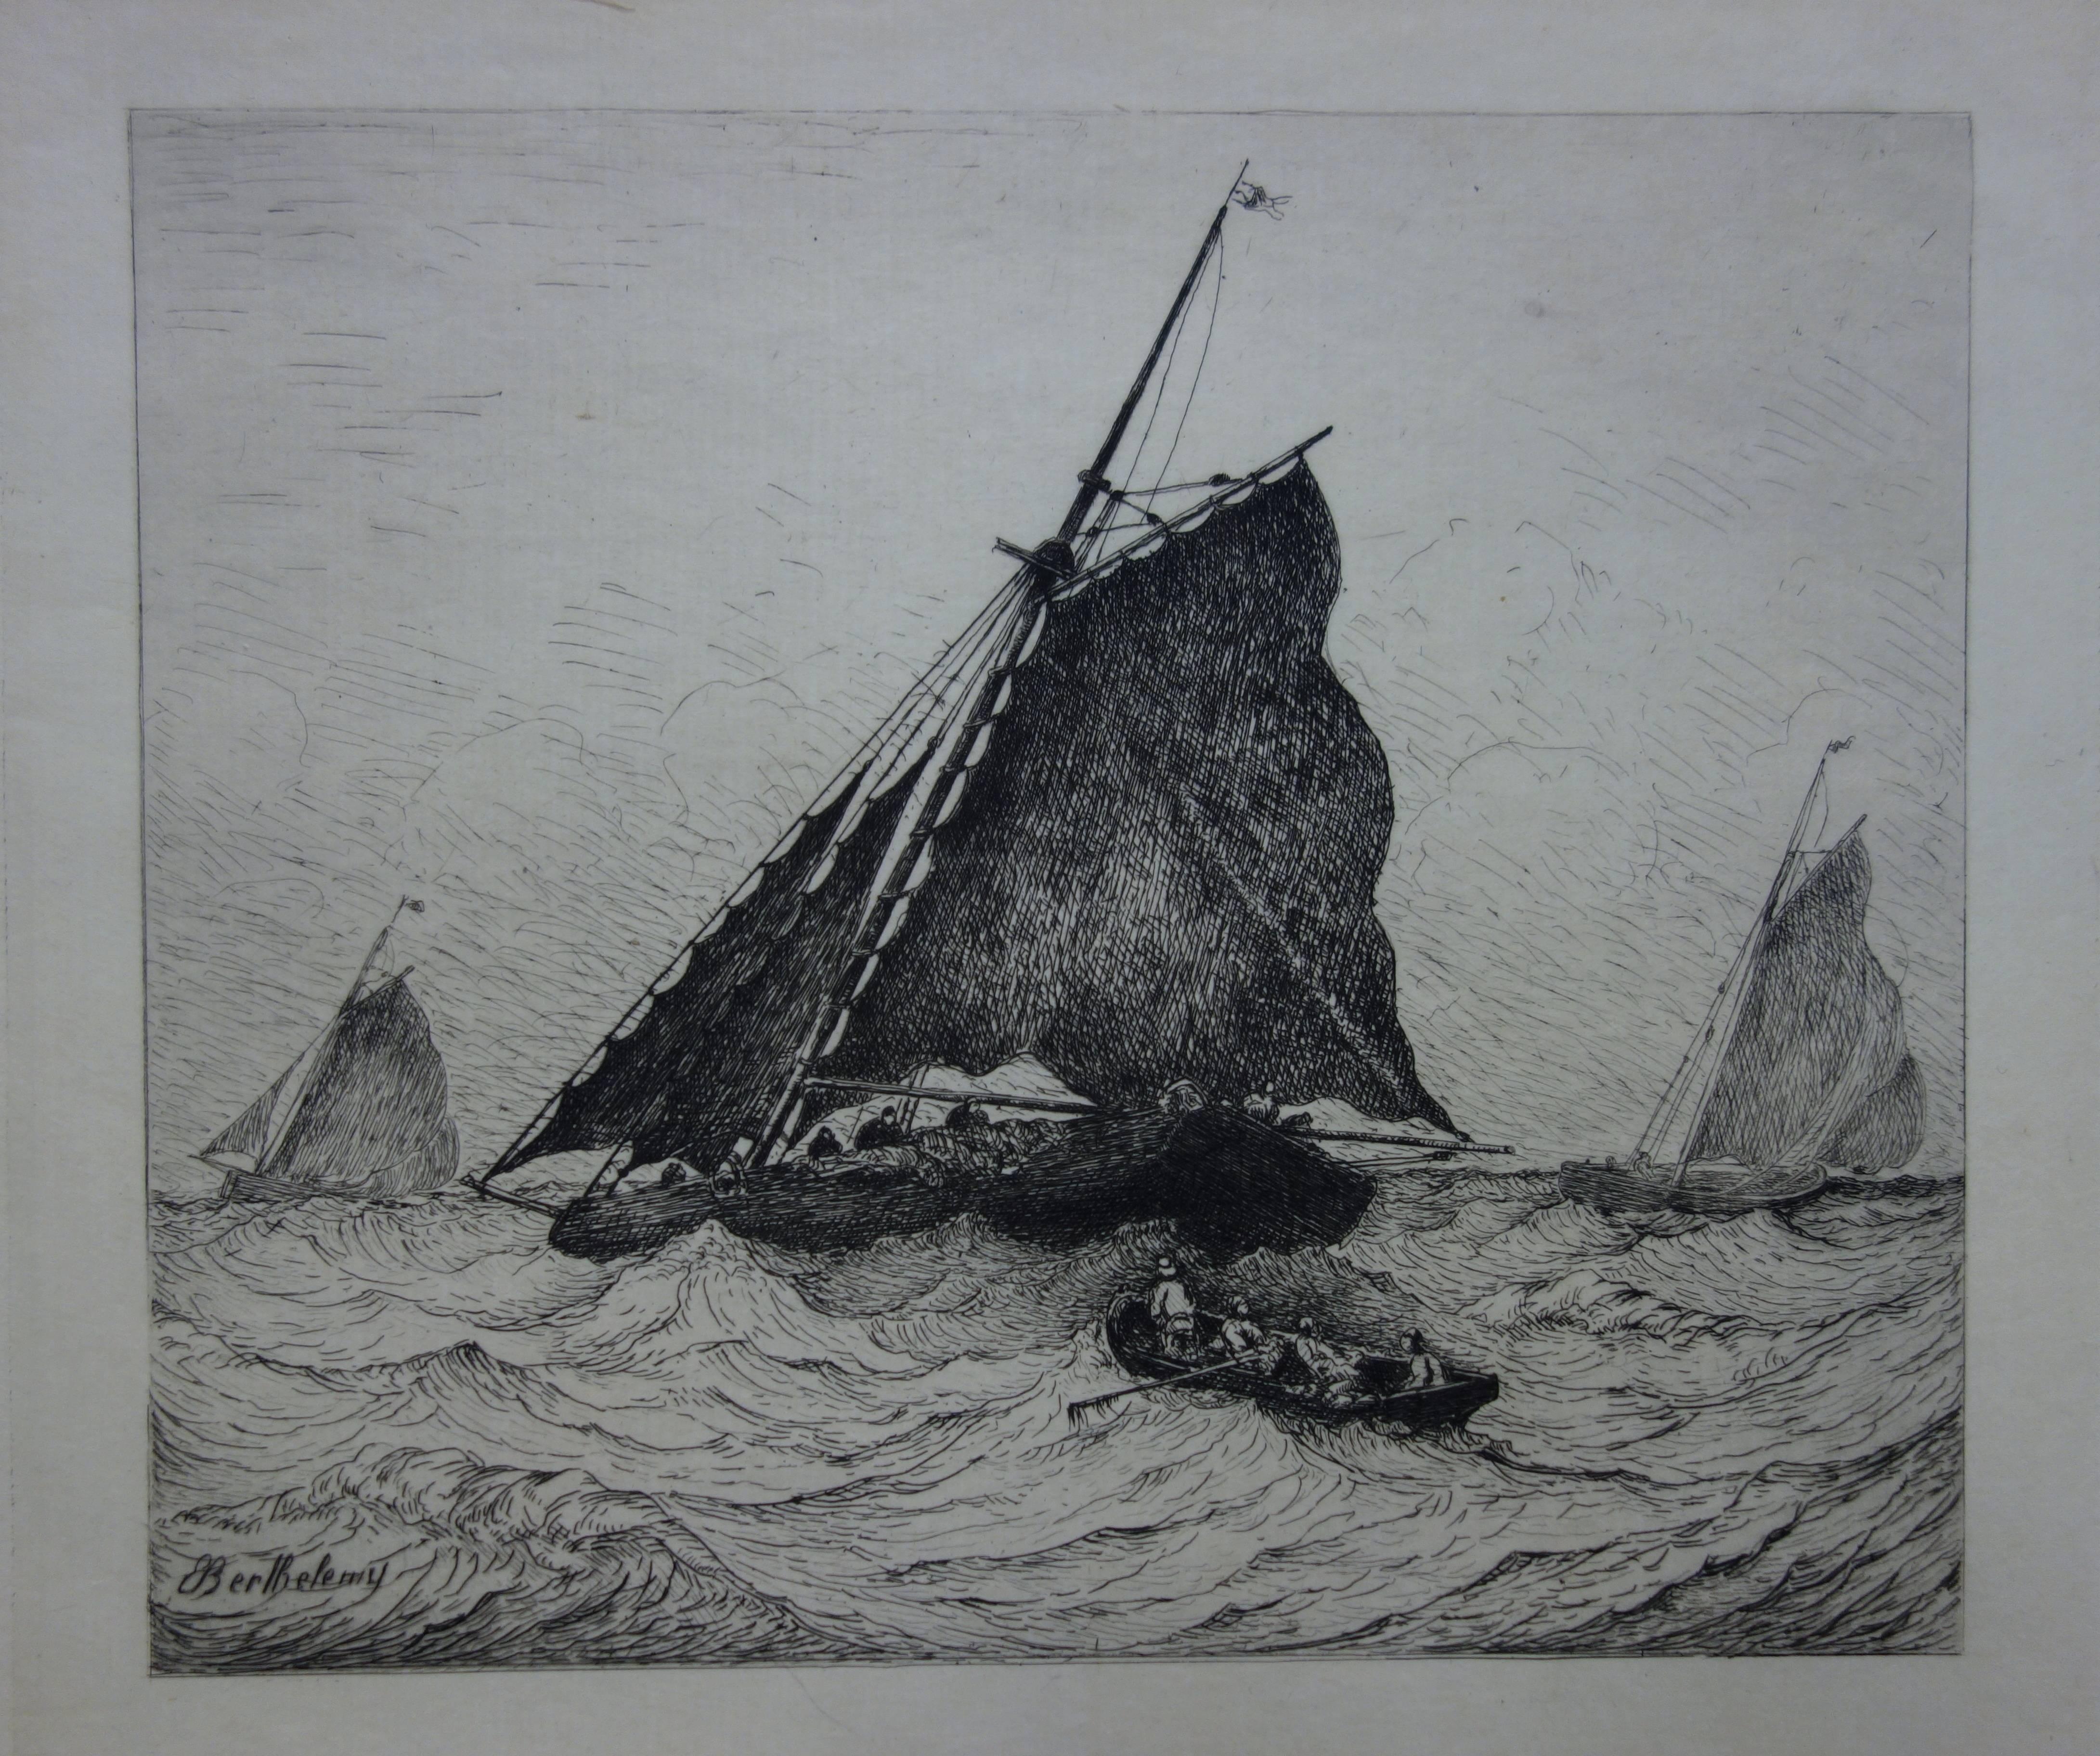 Pierre Emile Berthelemy Figurative Print - Rescue at Sea during the Storm - Original etching